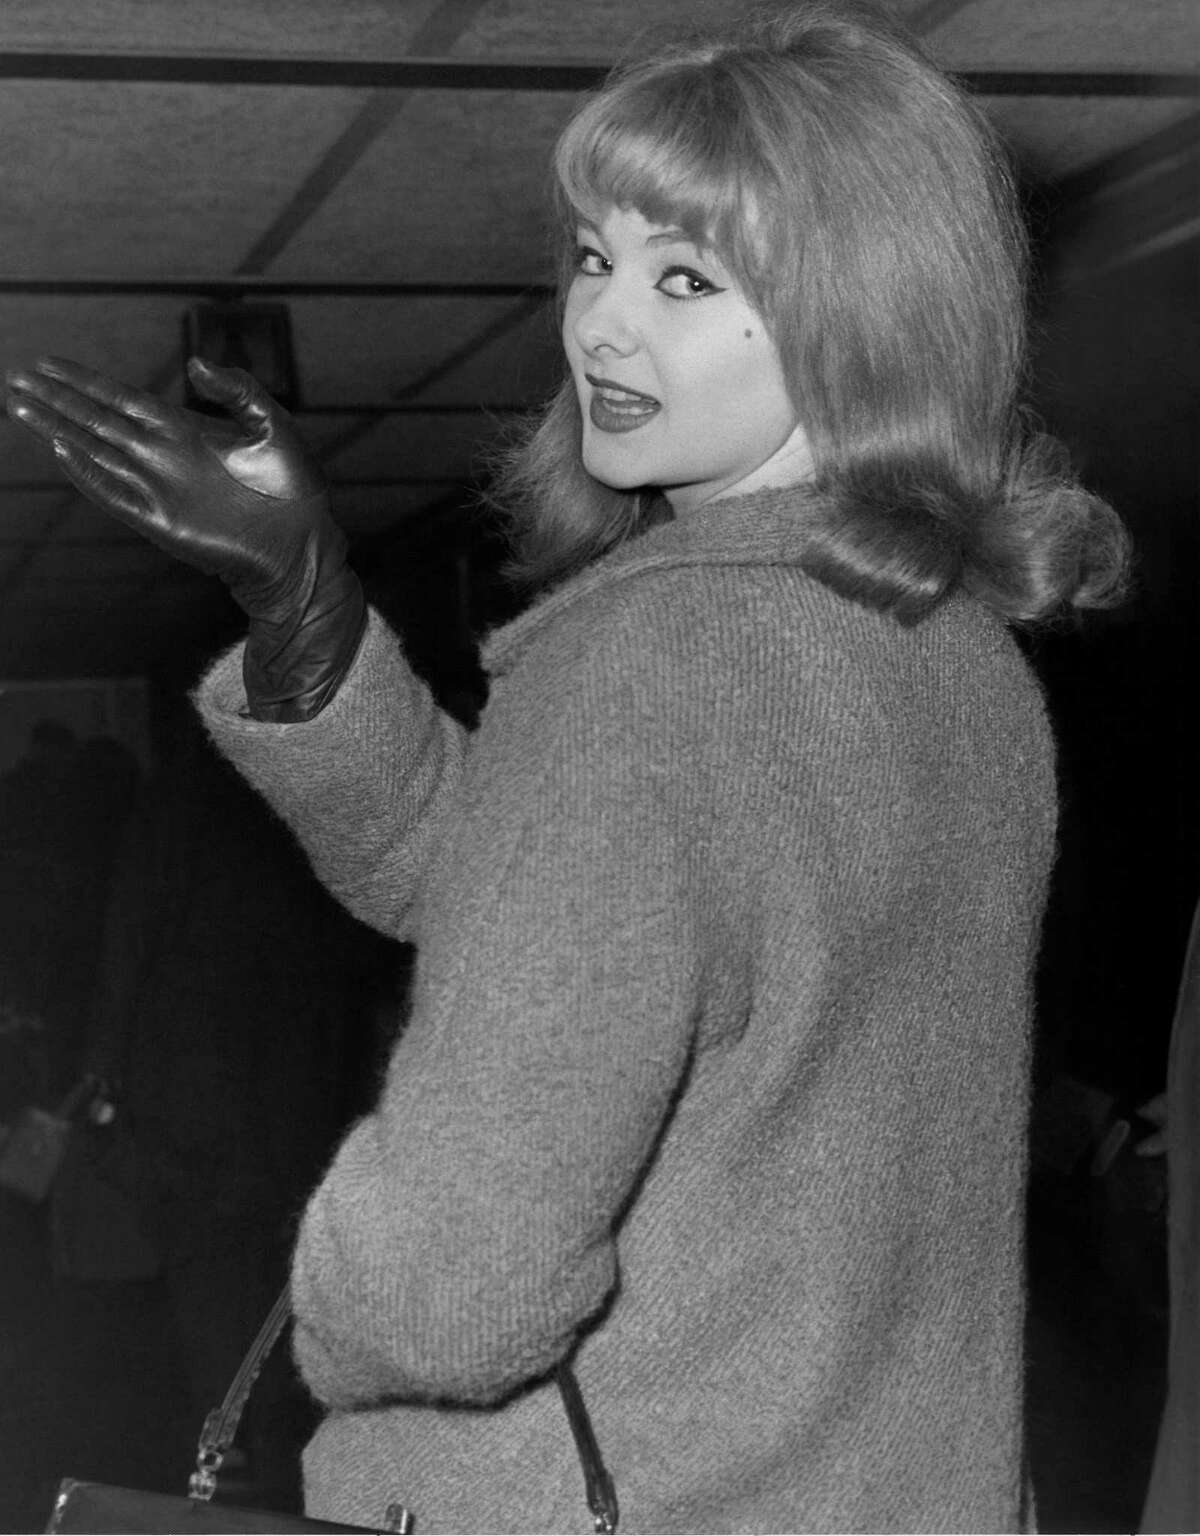 FILE - In this Jan. 7, 1964 file photo, Mandy Rice-Davies waves goodbye at London Airport as she leaves for Munich for a singing engagement. Mandy Rice-Davies, a key figure in Britain’s biggest Cold War political scandal, the ìProfumo Affair,î has died. She was 70. Her PR firm said Friday Dec. 19, 2014, that Rice-Davies died Thursday evening “after a short battle with cancer.”